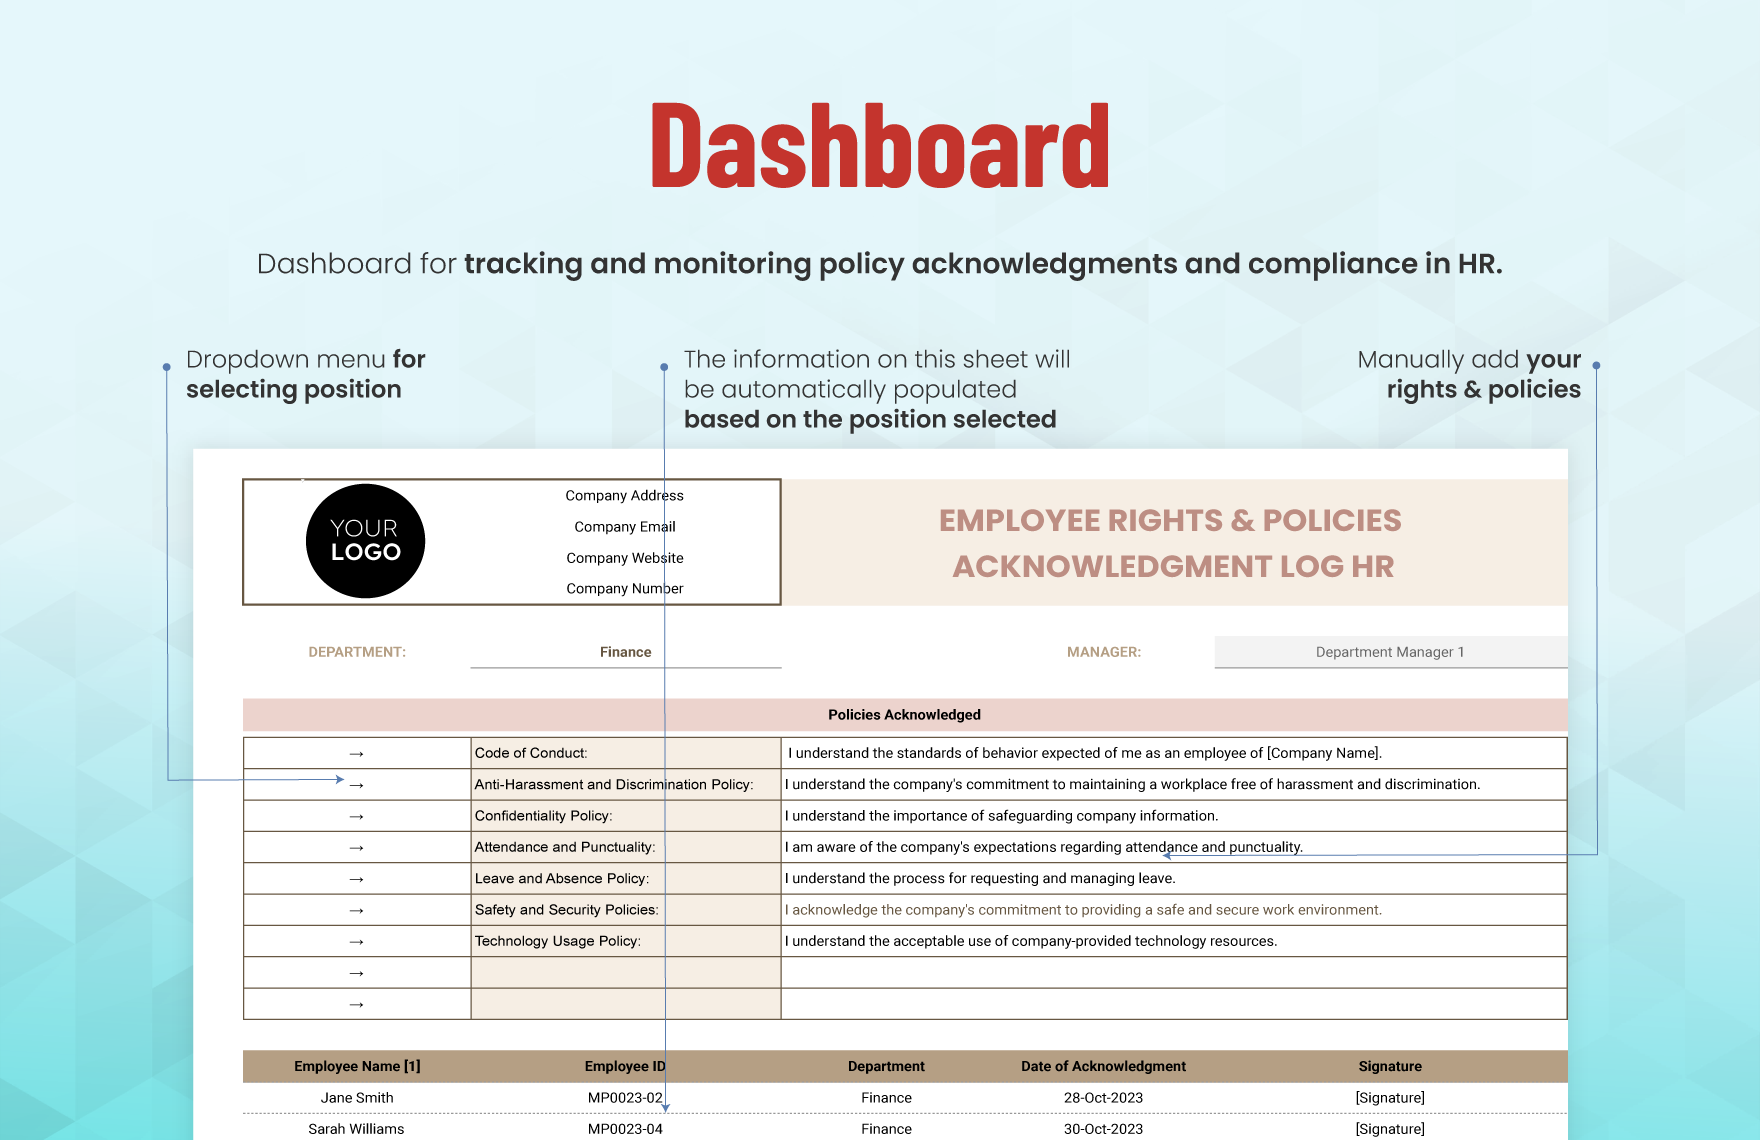 Employee Rights & Policies Acknowledgment Log HR Template